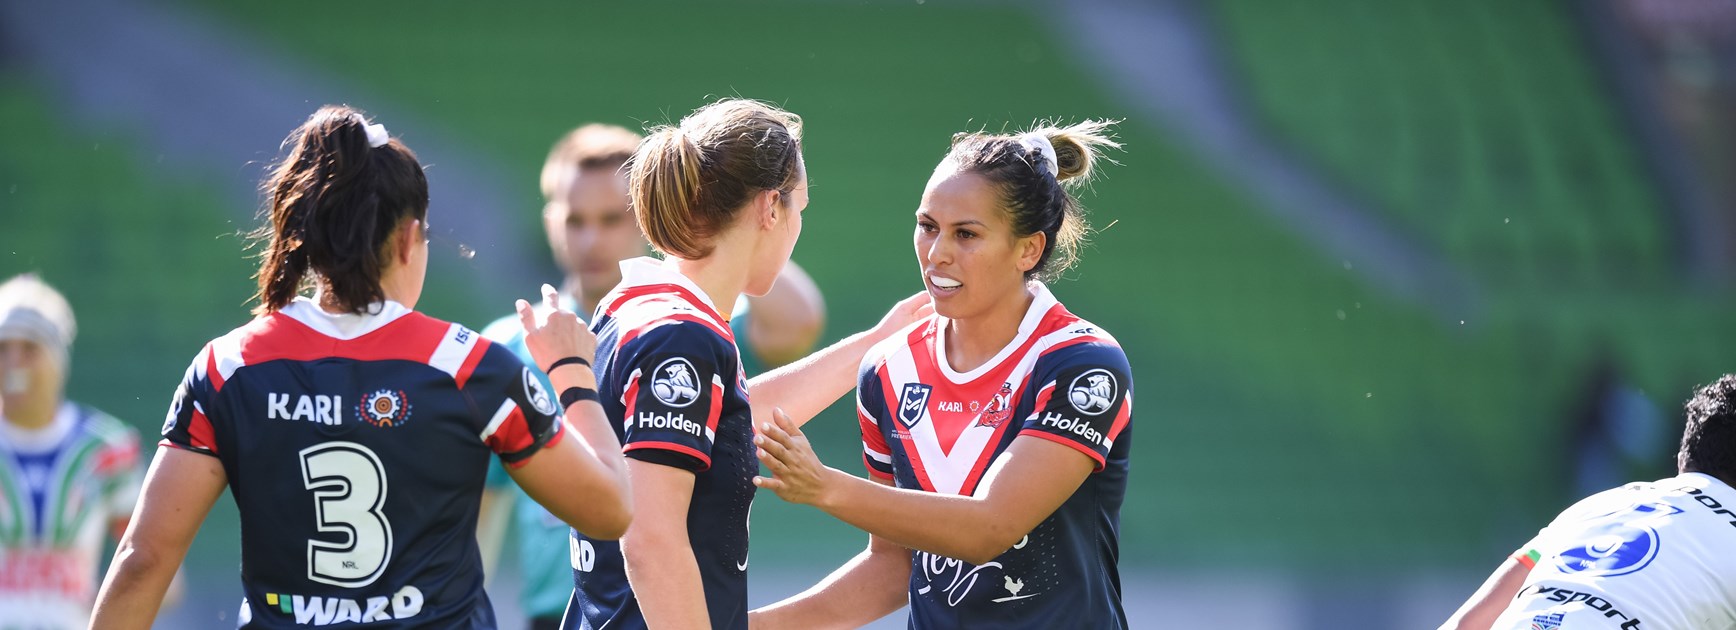 Warriors kick off NRLW season with solid win over Roosters